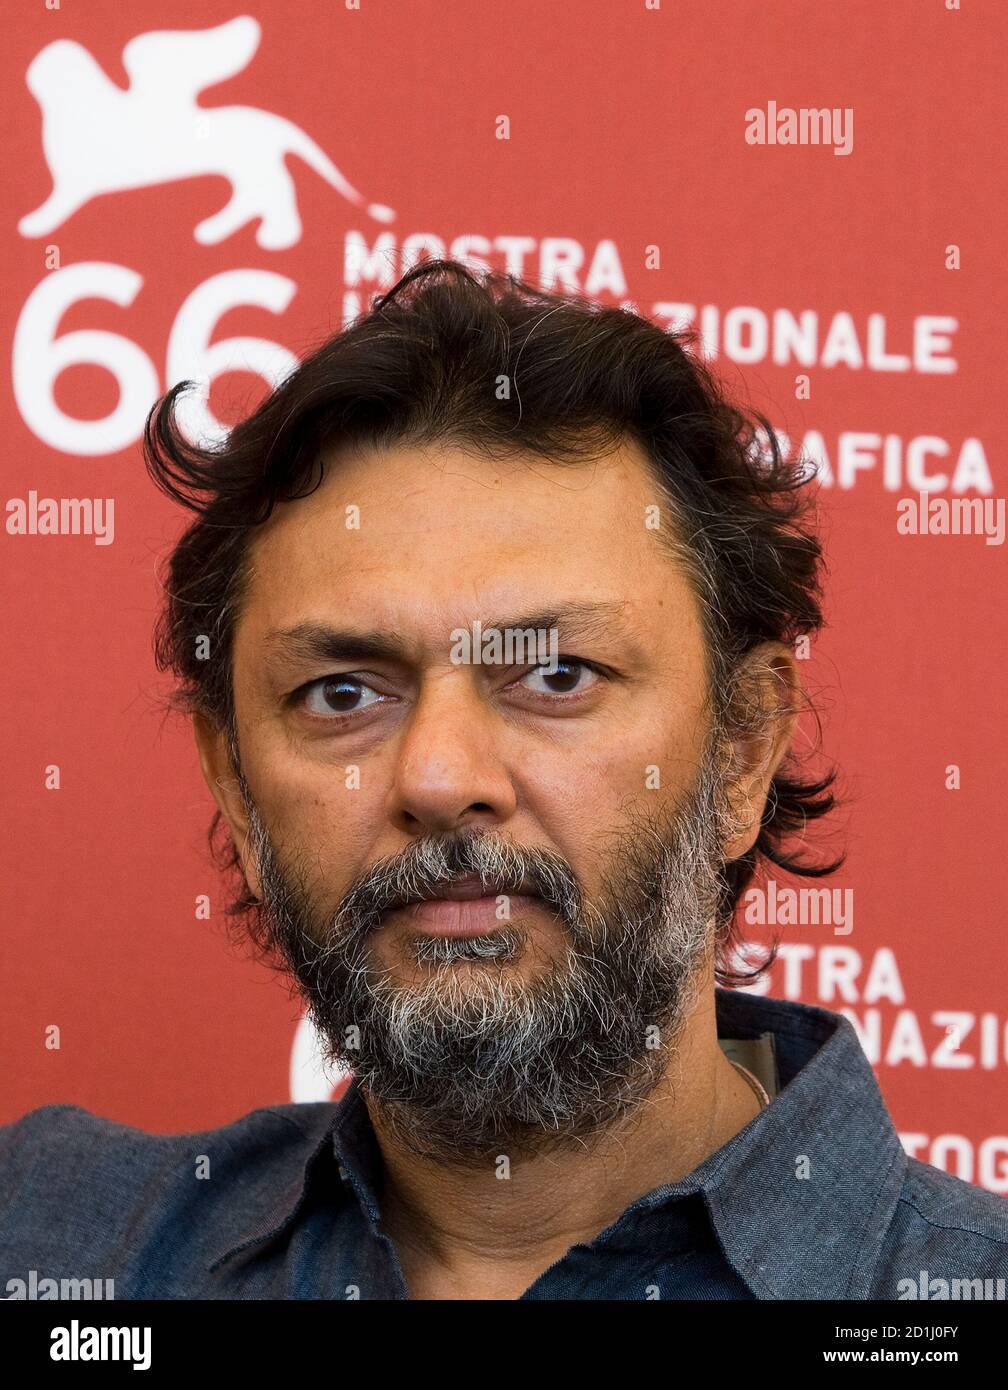 Director Rakeysh Omprakash Mehra attends the ''Delhi-6' ' photocall at the Palazzo del Casino during the 66th Venice Film Festival September 9, 2009. REUTERS/Alessandro Bianchi   (ITALY ENTERTAINMENT) Stock Photo